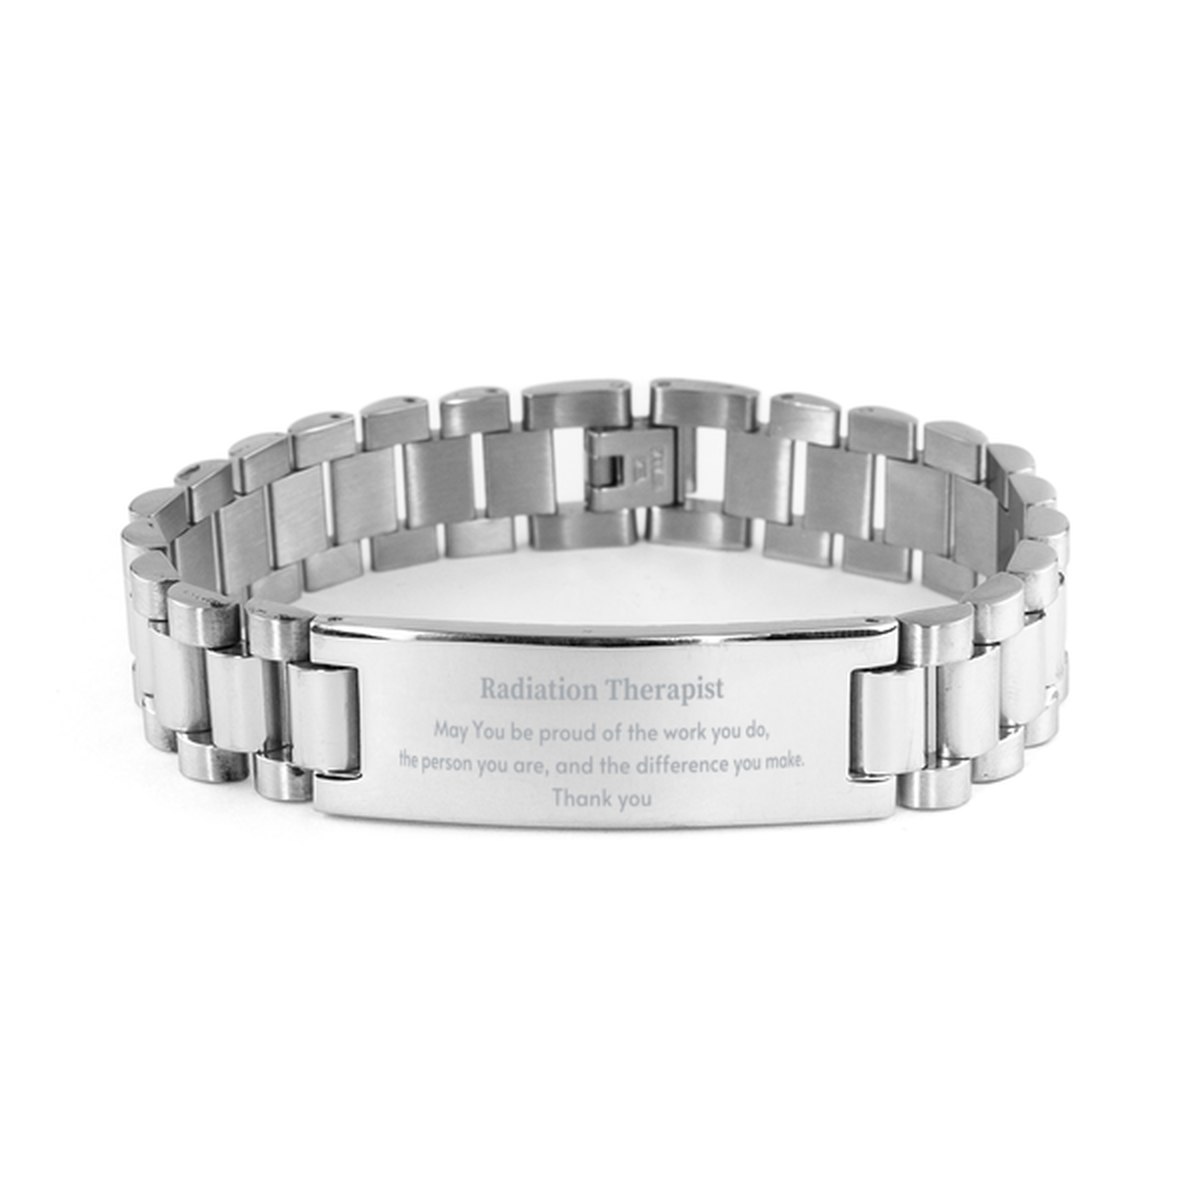 Heartwarming Ladder Stainless Steel Bracelet Retirement Coworkers Gifts for Radiation Therapist, Radiation Therapist May You be proud of the work you do, the person you are Gifts for Boss Men Women Friends